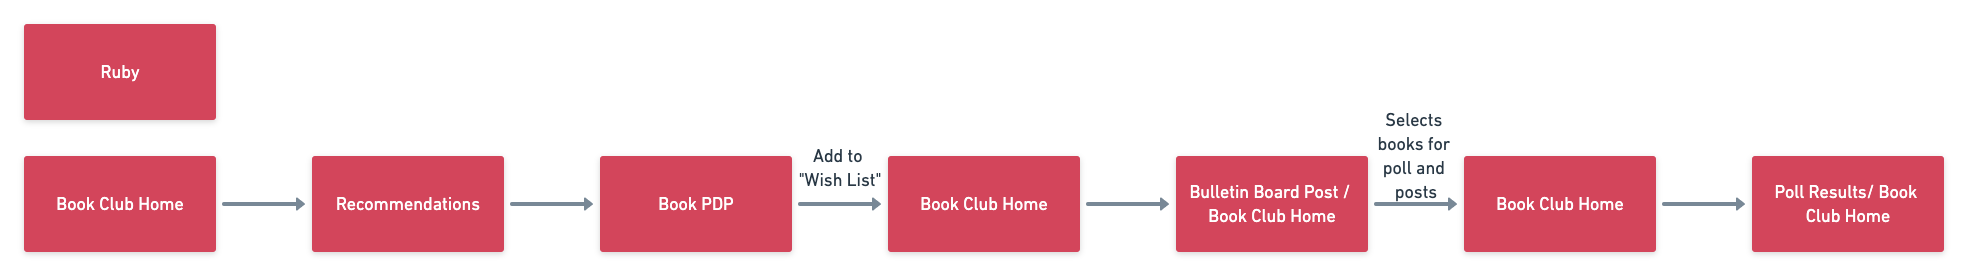 task flow for adding a book to the club's wishlist